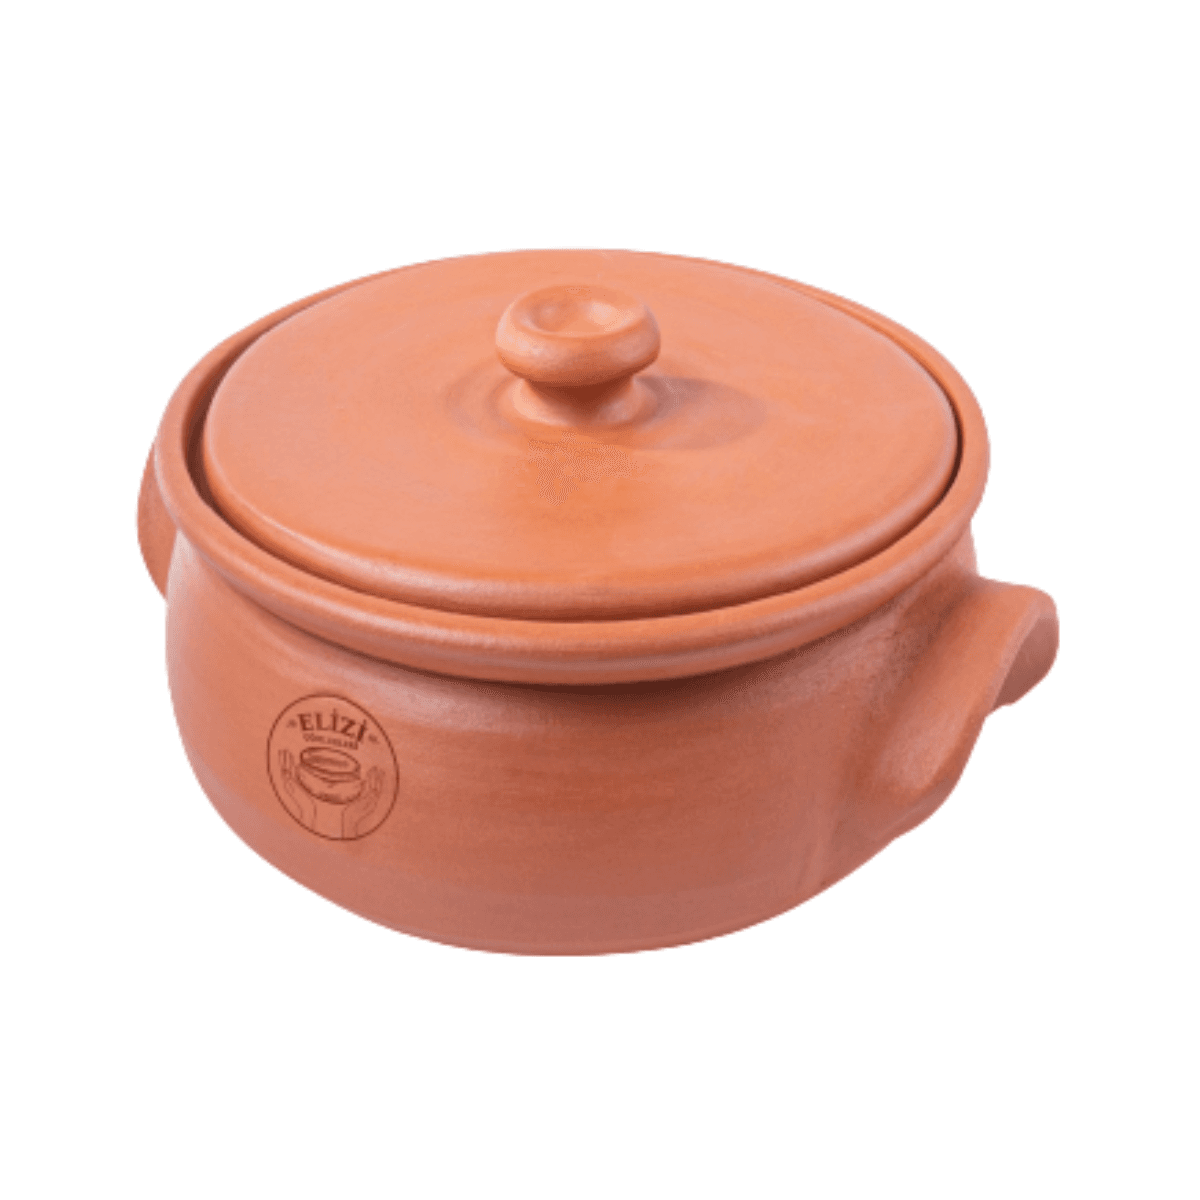 Elizi Clay Lined Pot 30 cm Brown Clay